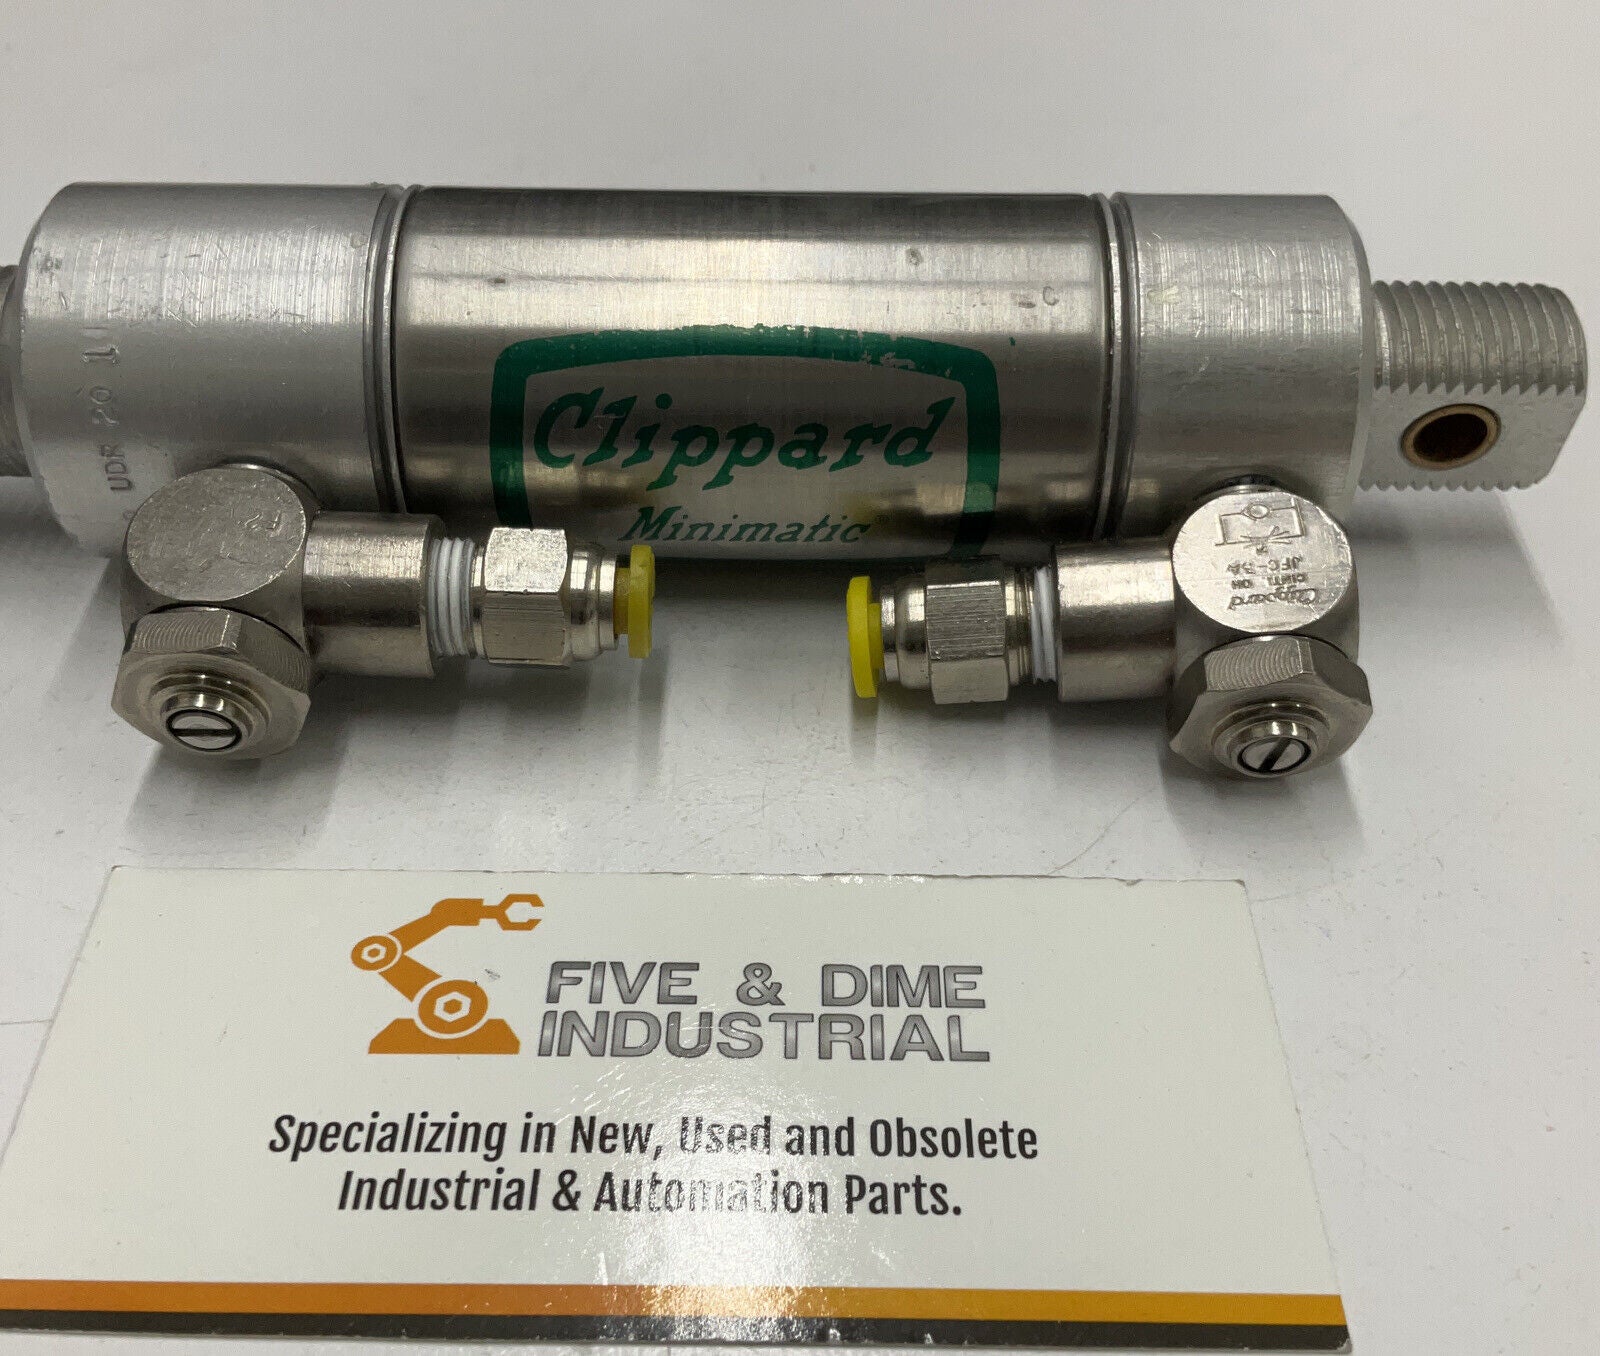 Clippard UDR-2-1 Pneumatic Cylinder 1-1/4" Bore 1" Stroke w/ Fittings (BL192)